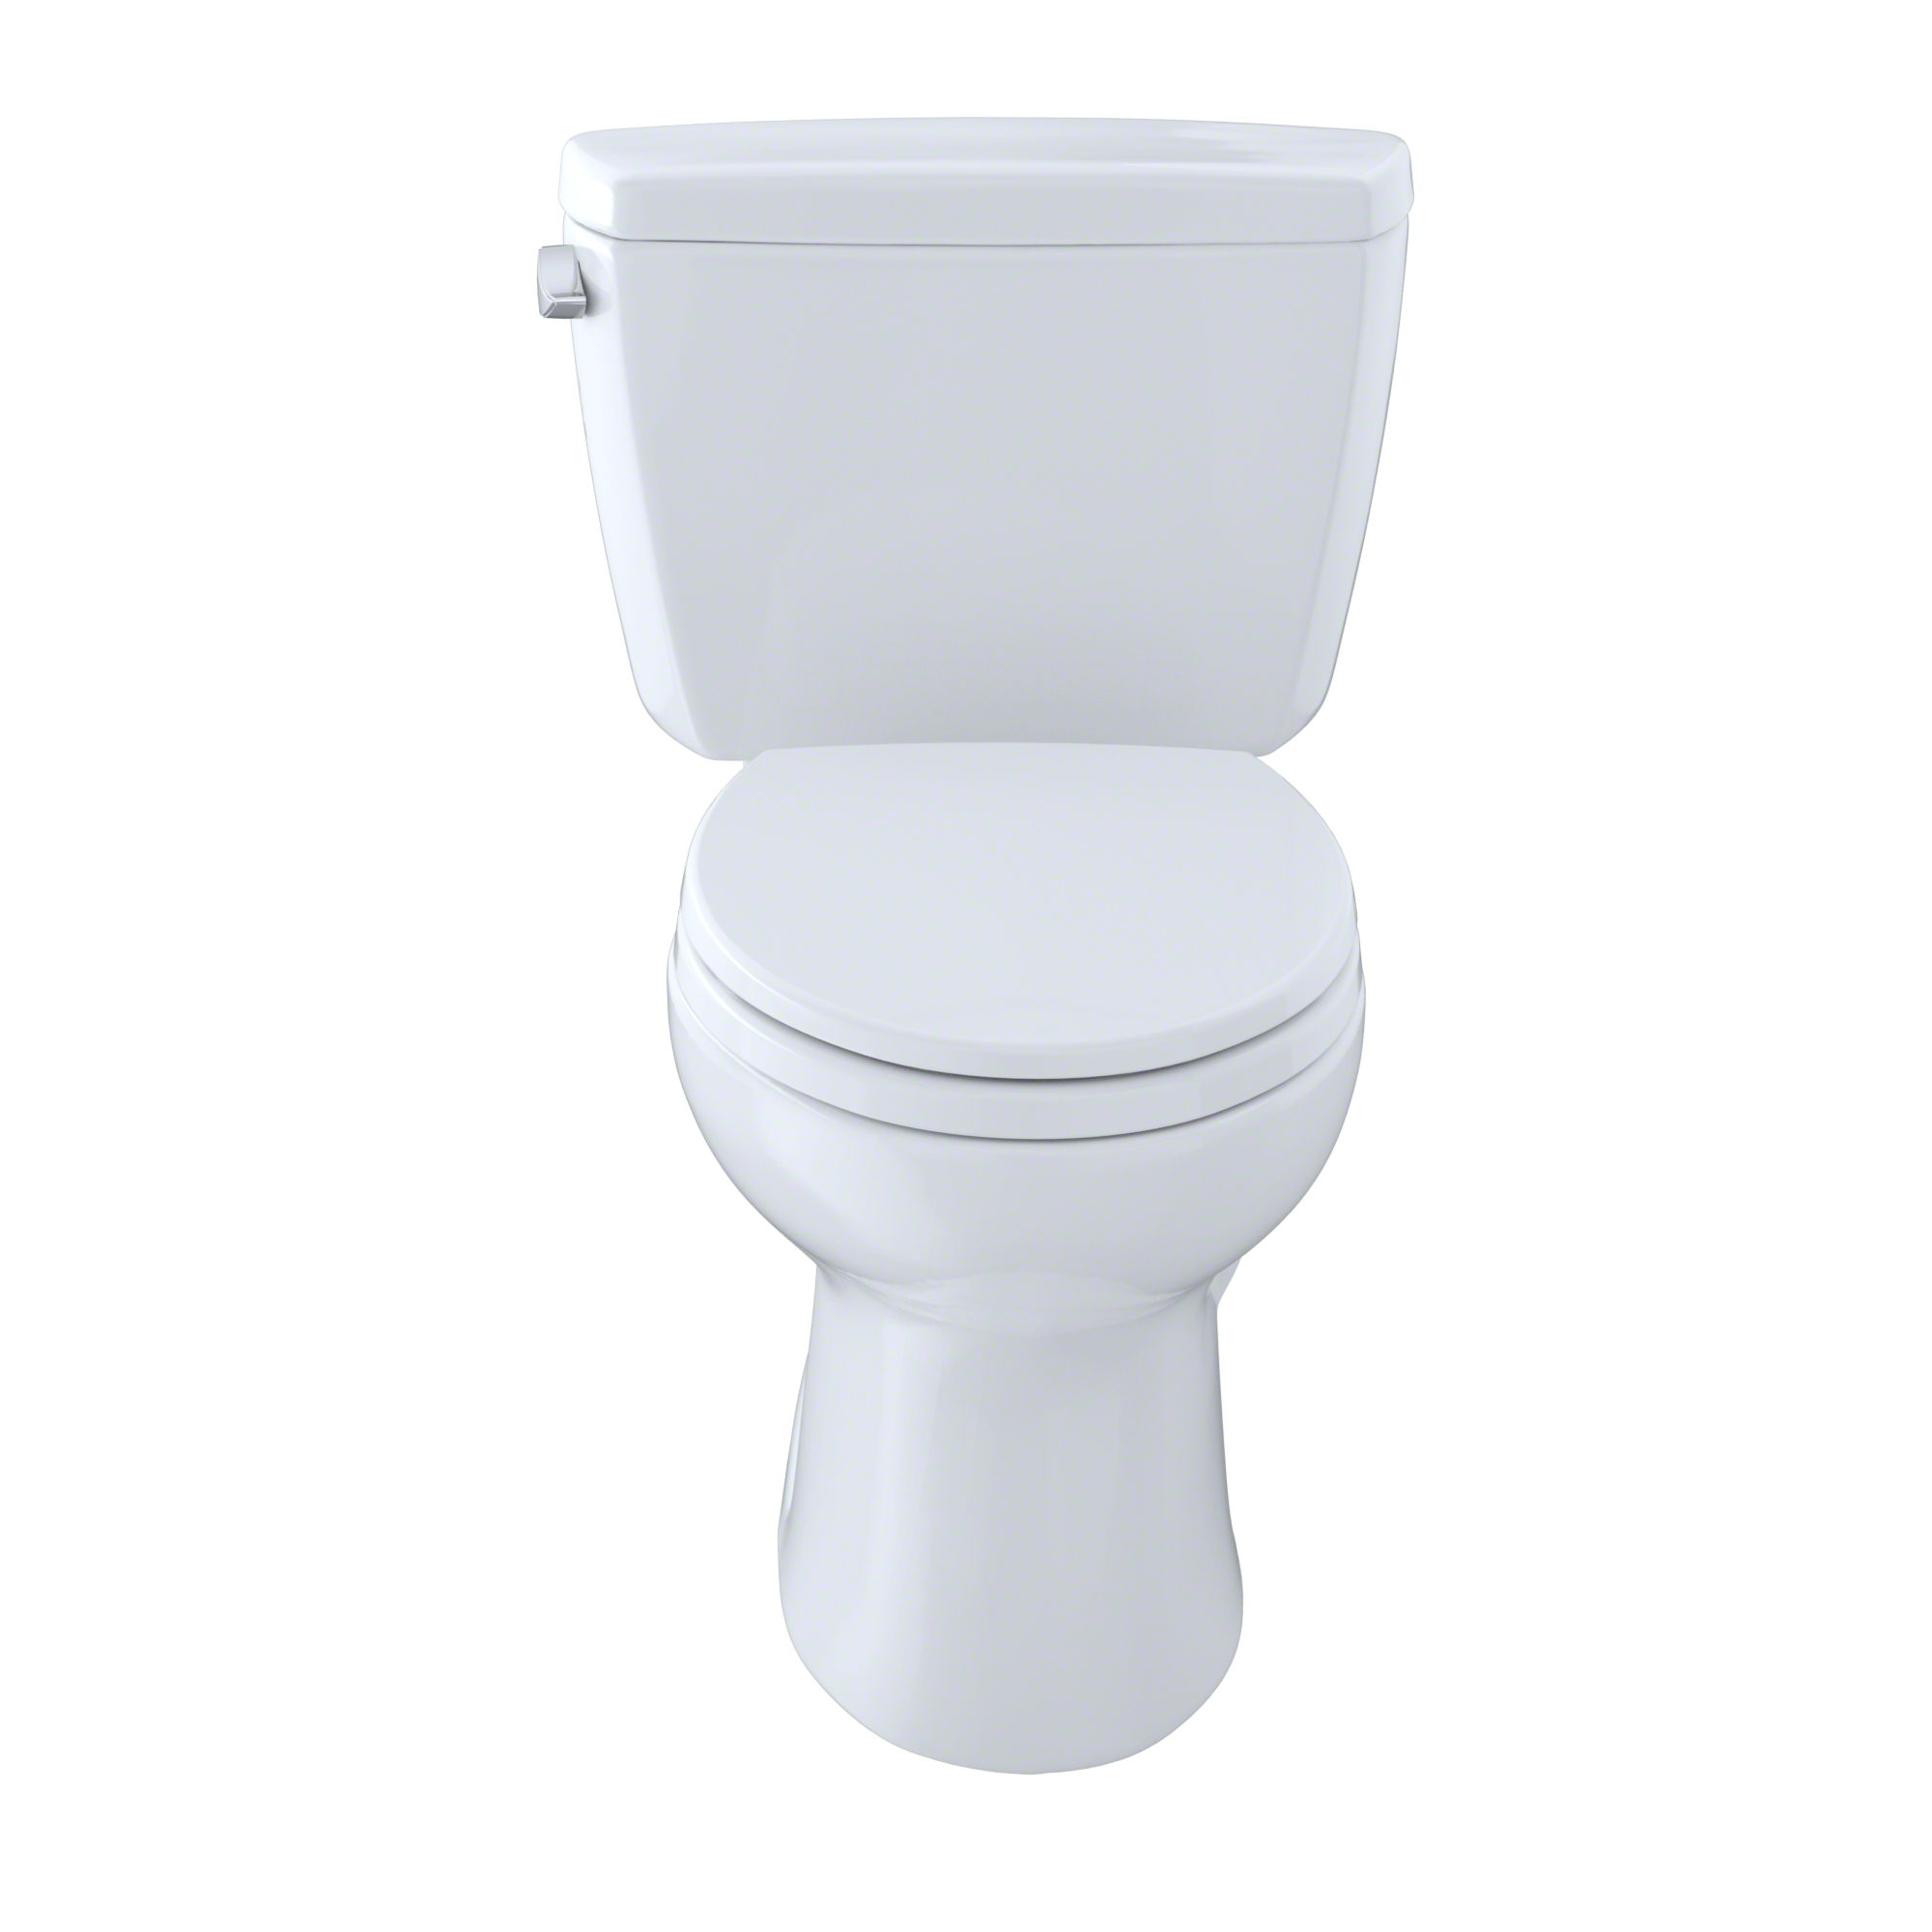 TOTO® Eco Drake® Two-Piece Elongated 1.28 GPF Toilet with CeFiONtect?, Cotton White - CST744EG#01 - image 2 of 2